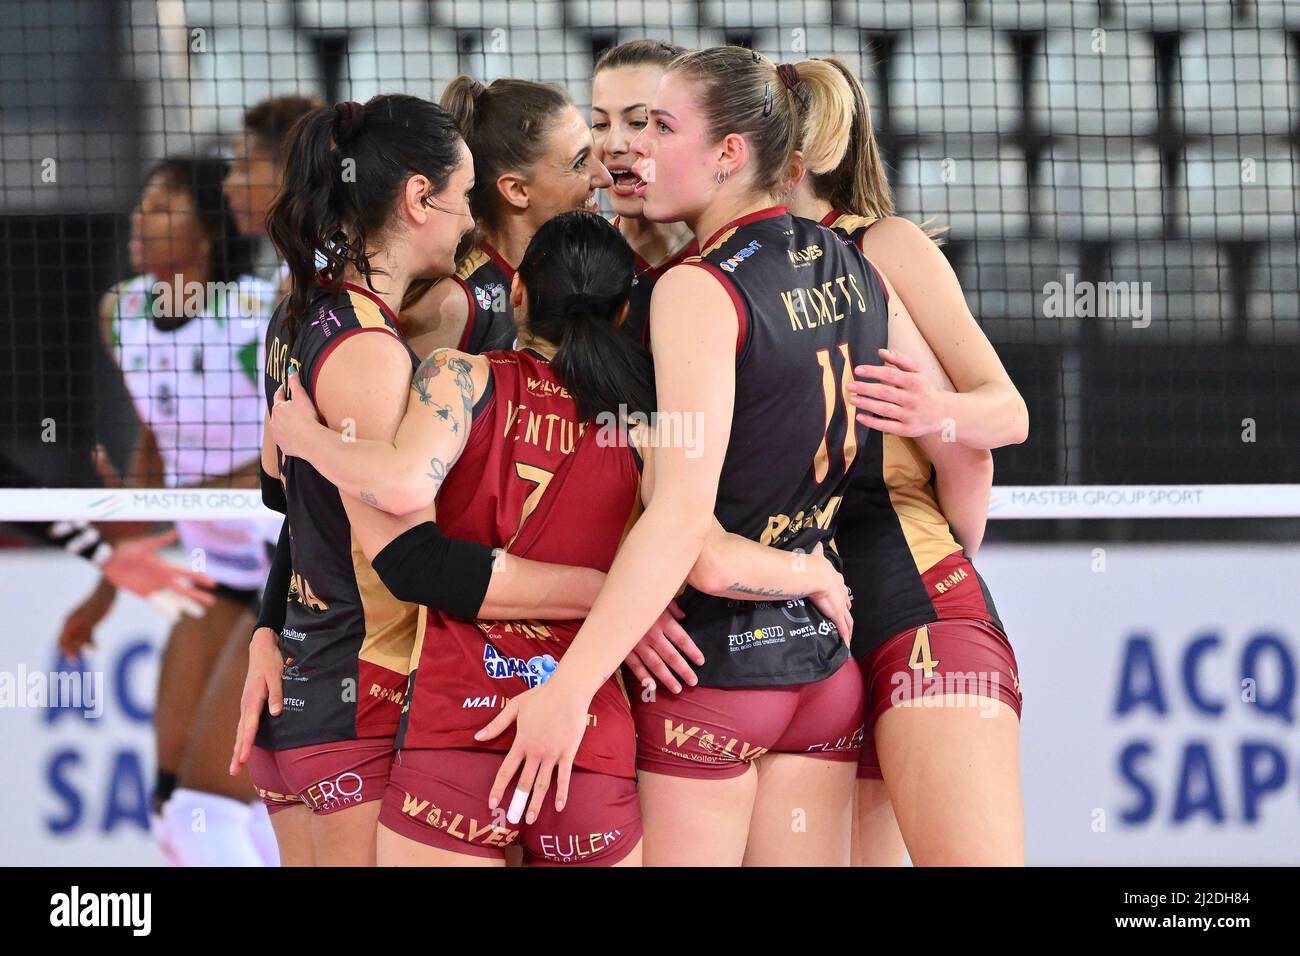 March 30, 2022, Rome, Italy, Italy Roma Team during the Womens Volleyball Championship Series A1 match between Acqua and Sapone Volley Roma and MeqaBox Volley at PalaEur, 30th March, 2022 in Rome,